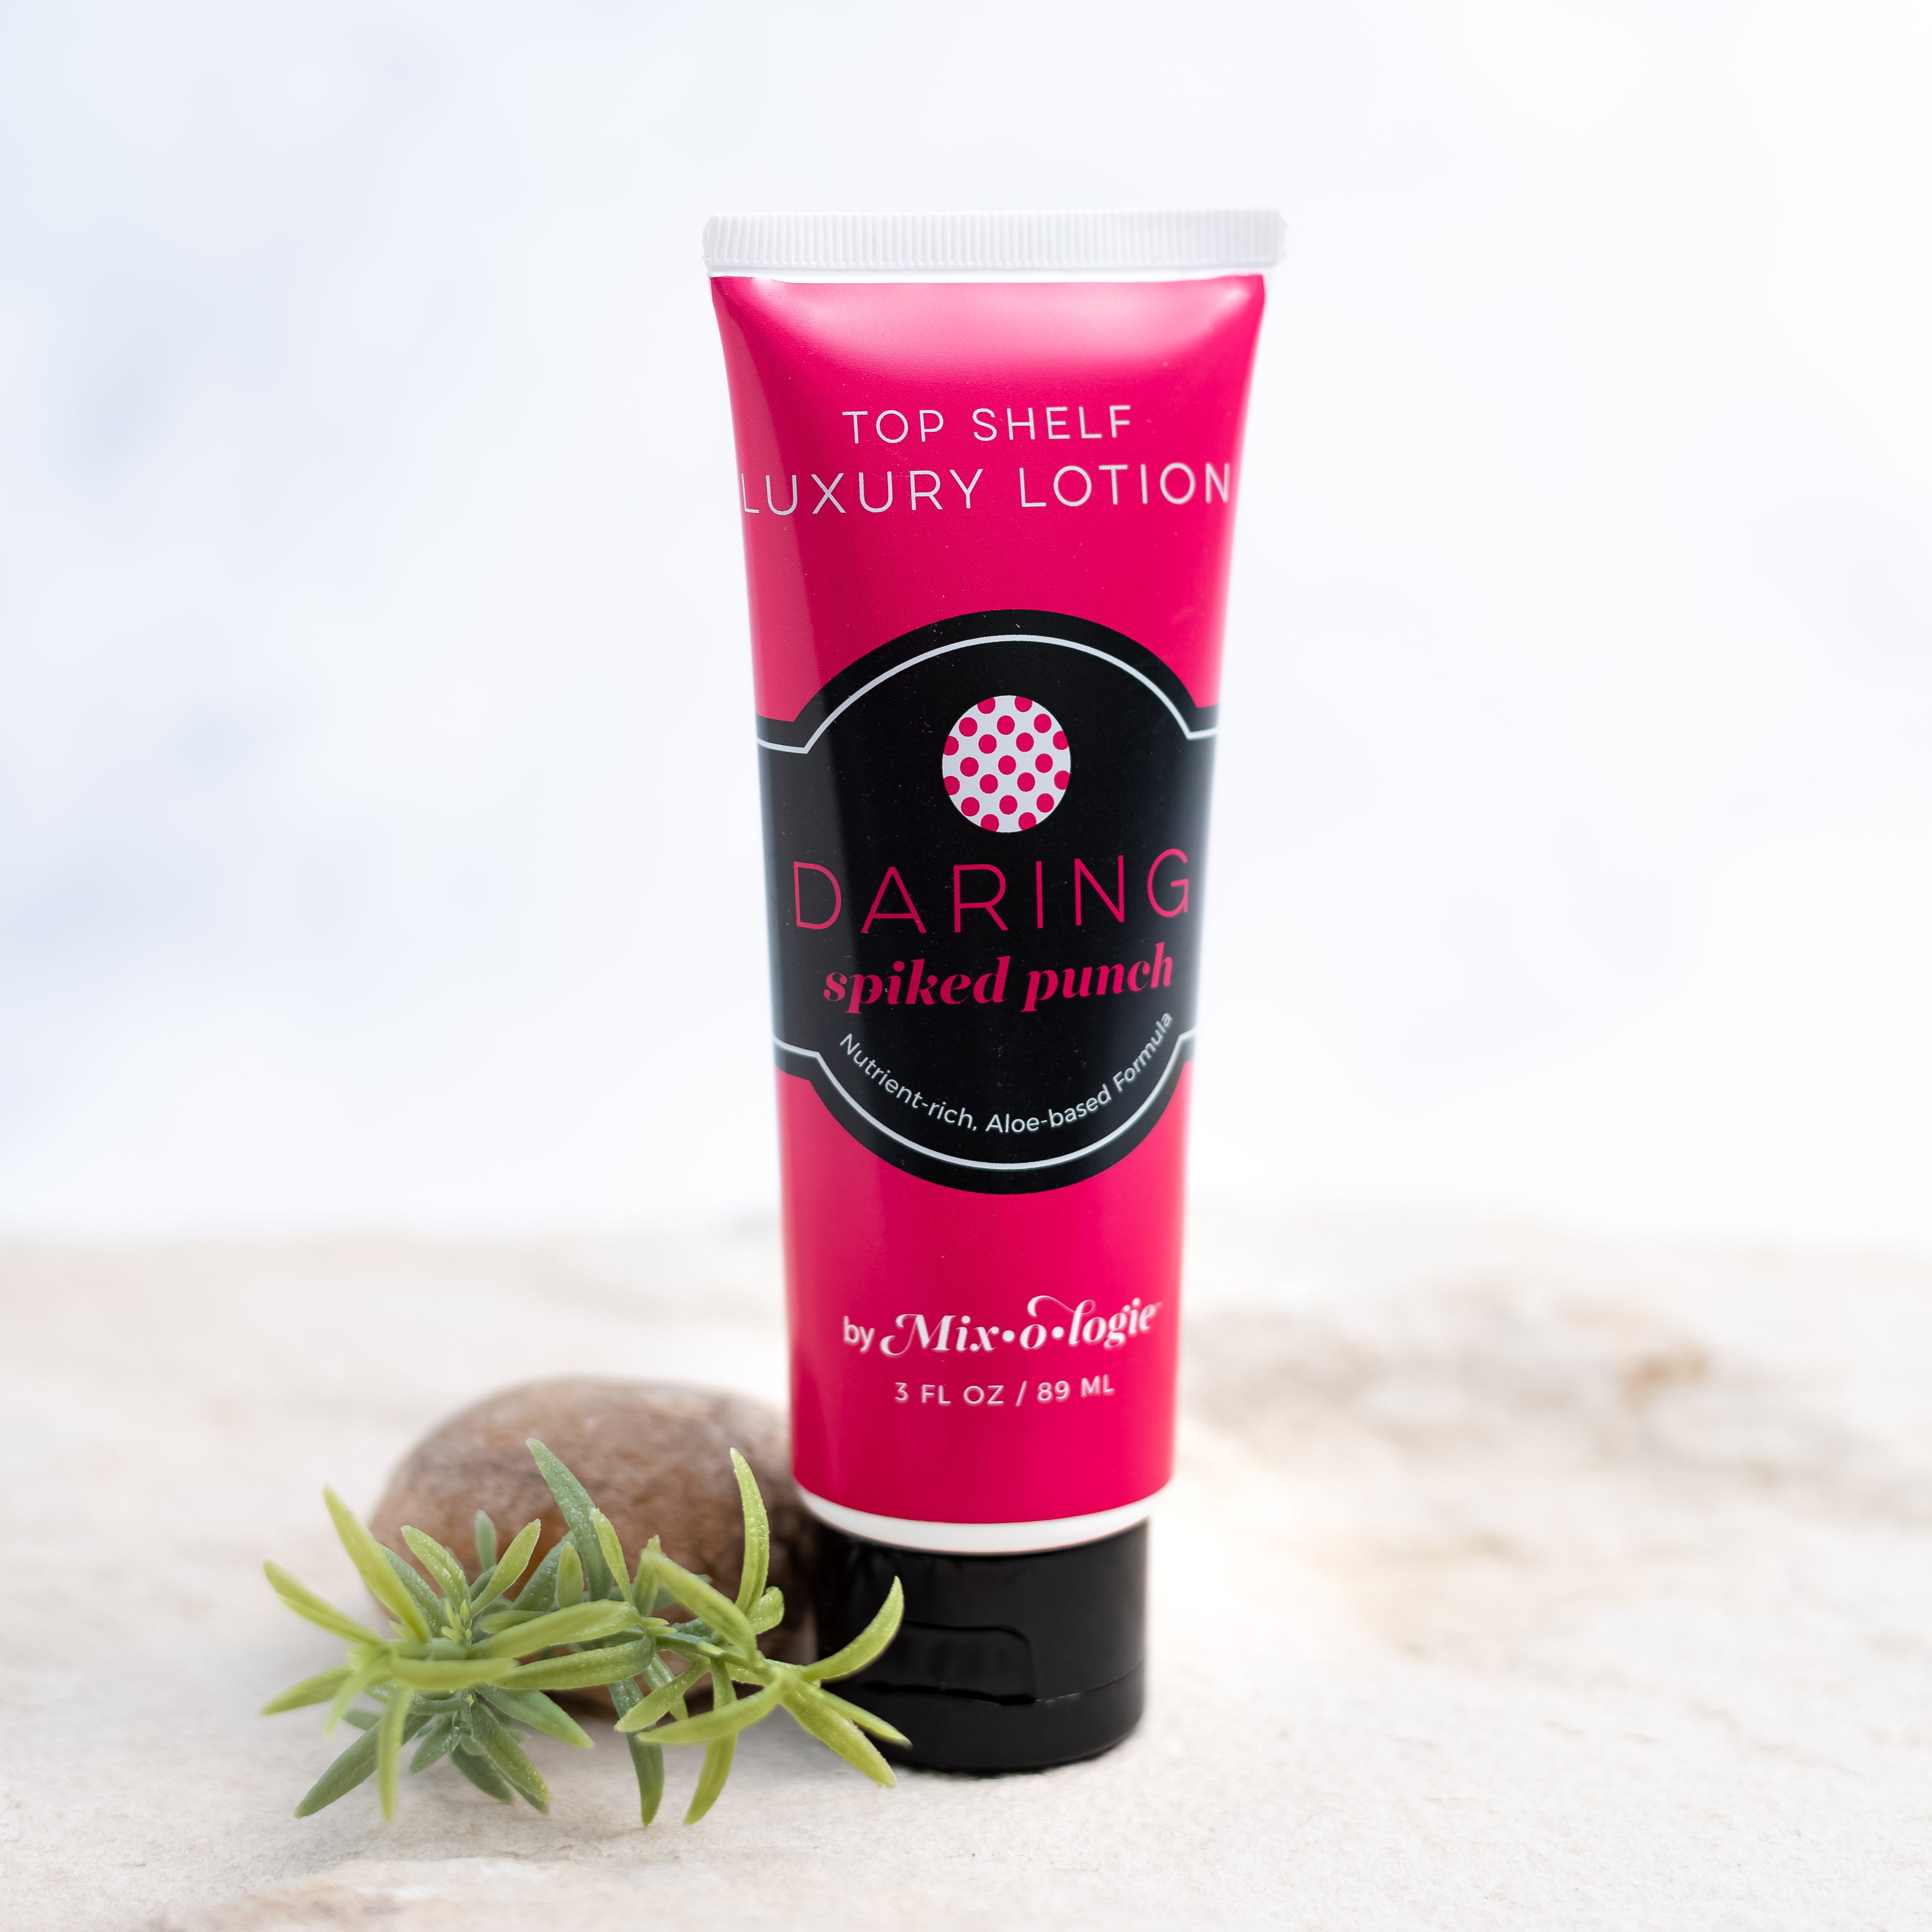 Daring (Spiked Punch) Top Shelf Lotion in bright pink tube with black lid and label. Nutrient rich, aloe-based formula, tube has 5 fl oz or 89 mL. Pictured with white background, sand, rocks, and greenery. 